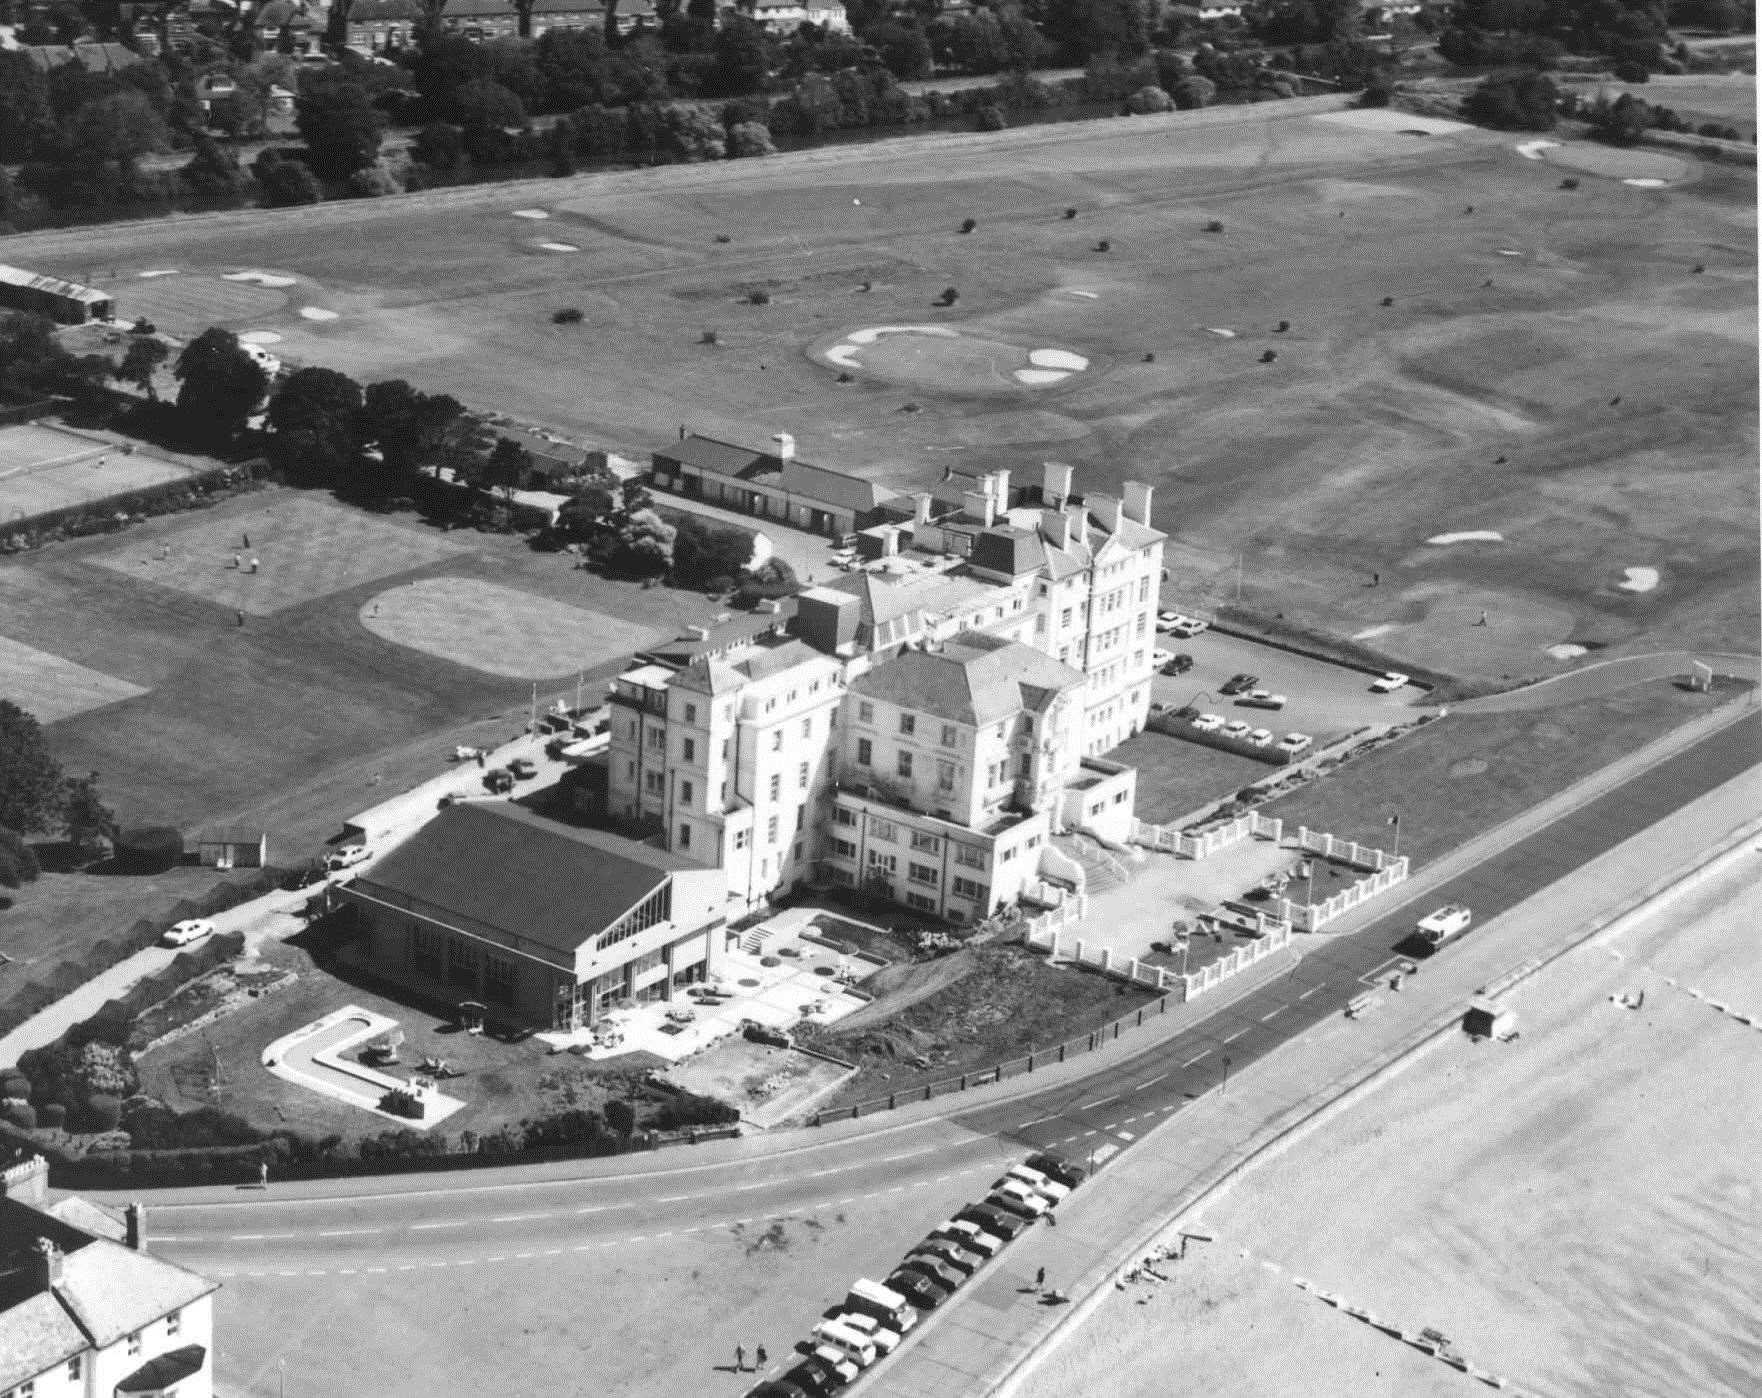 The impressive Hythe Imperial Hotel pictured from above in 1981